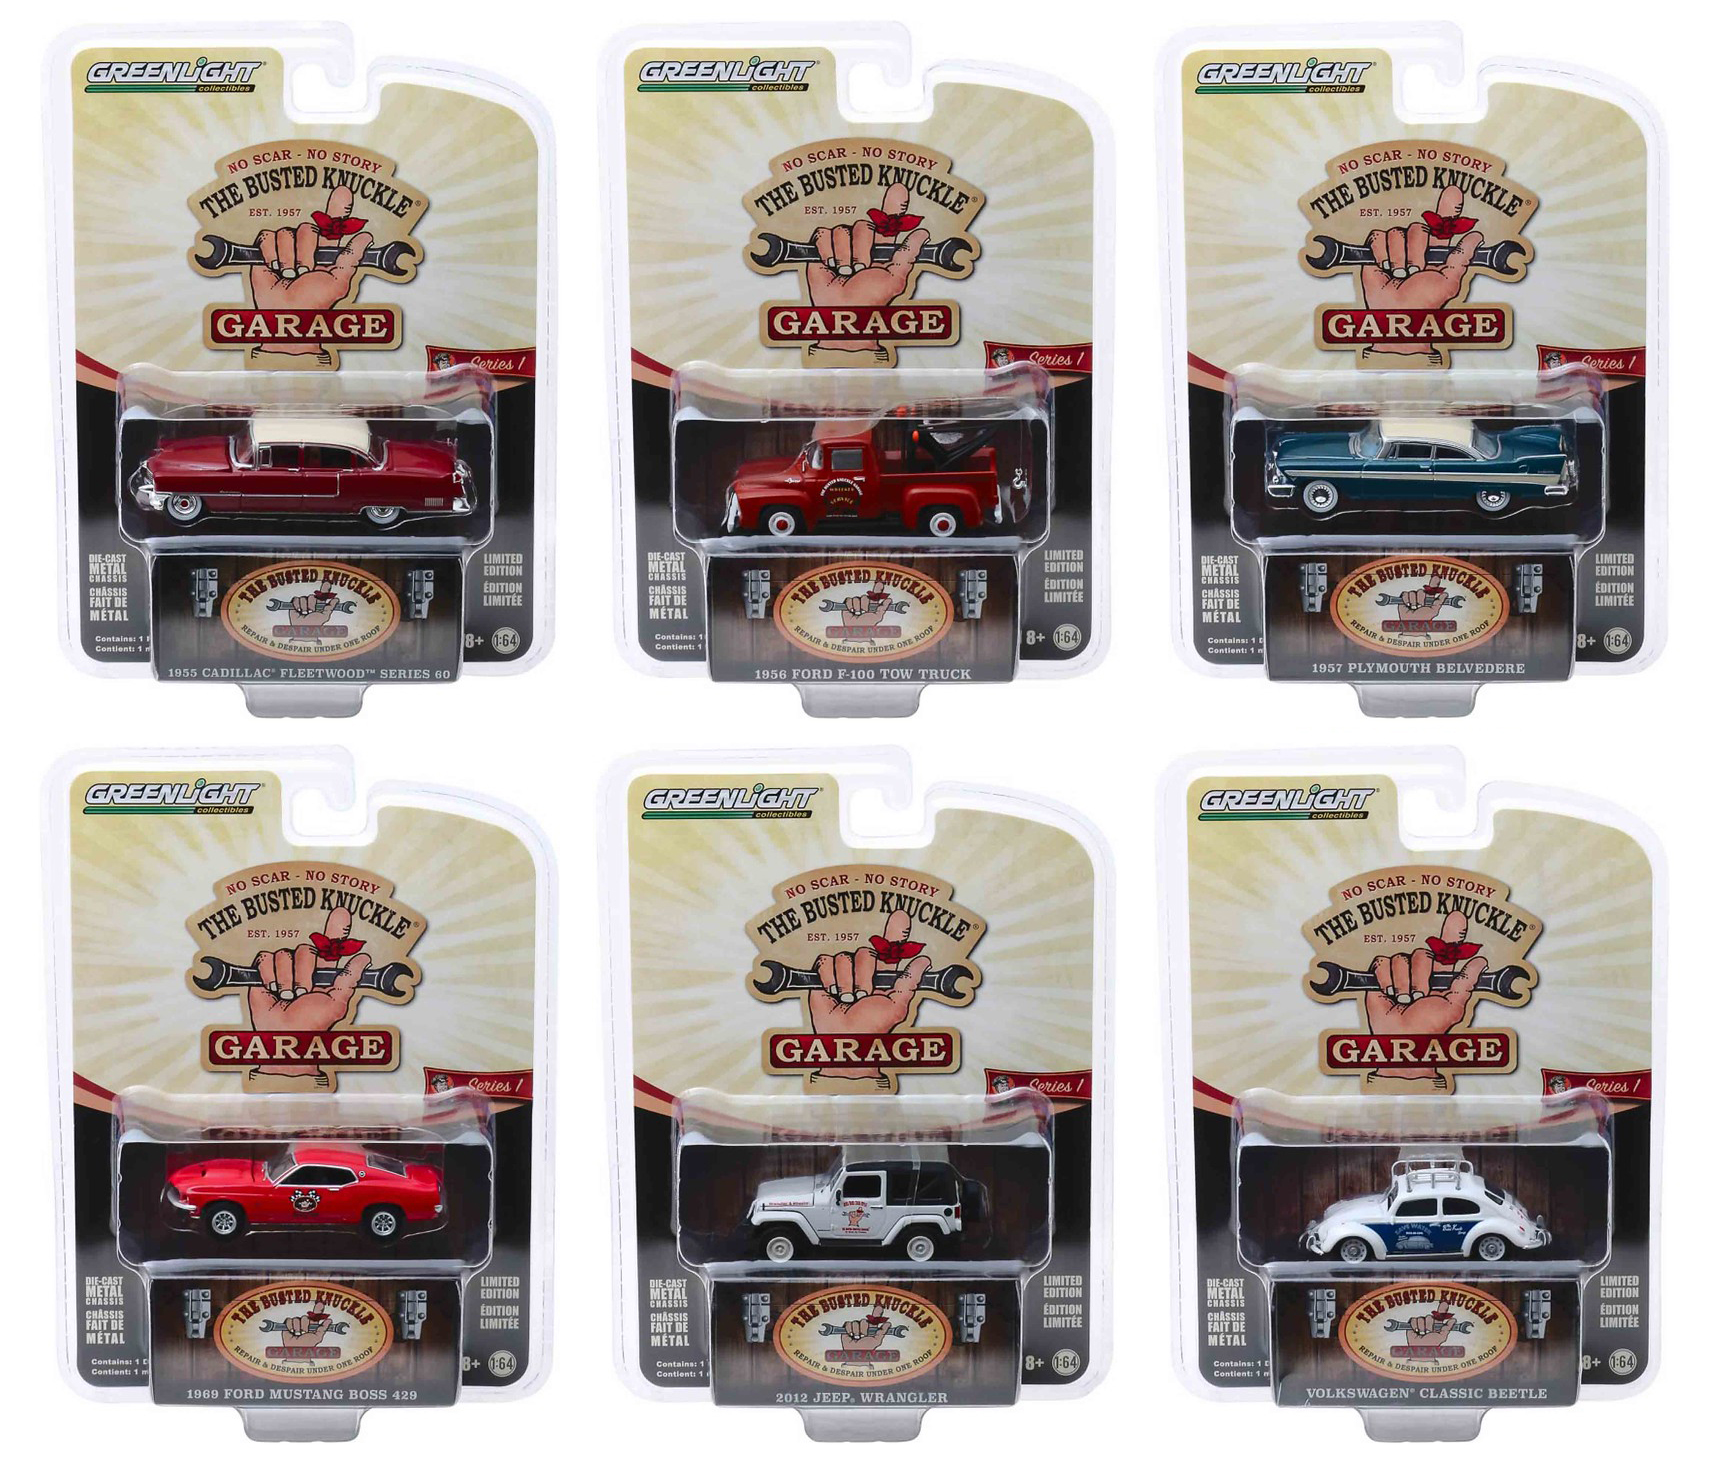 "Busted Knuckle Garage" Series 1 6 piece Set 1/64 Diecast Model Cars by Greenlight